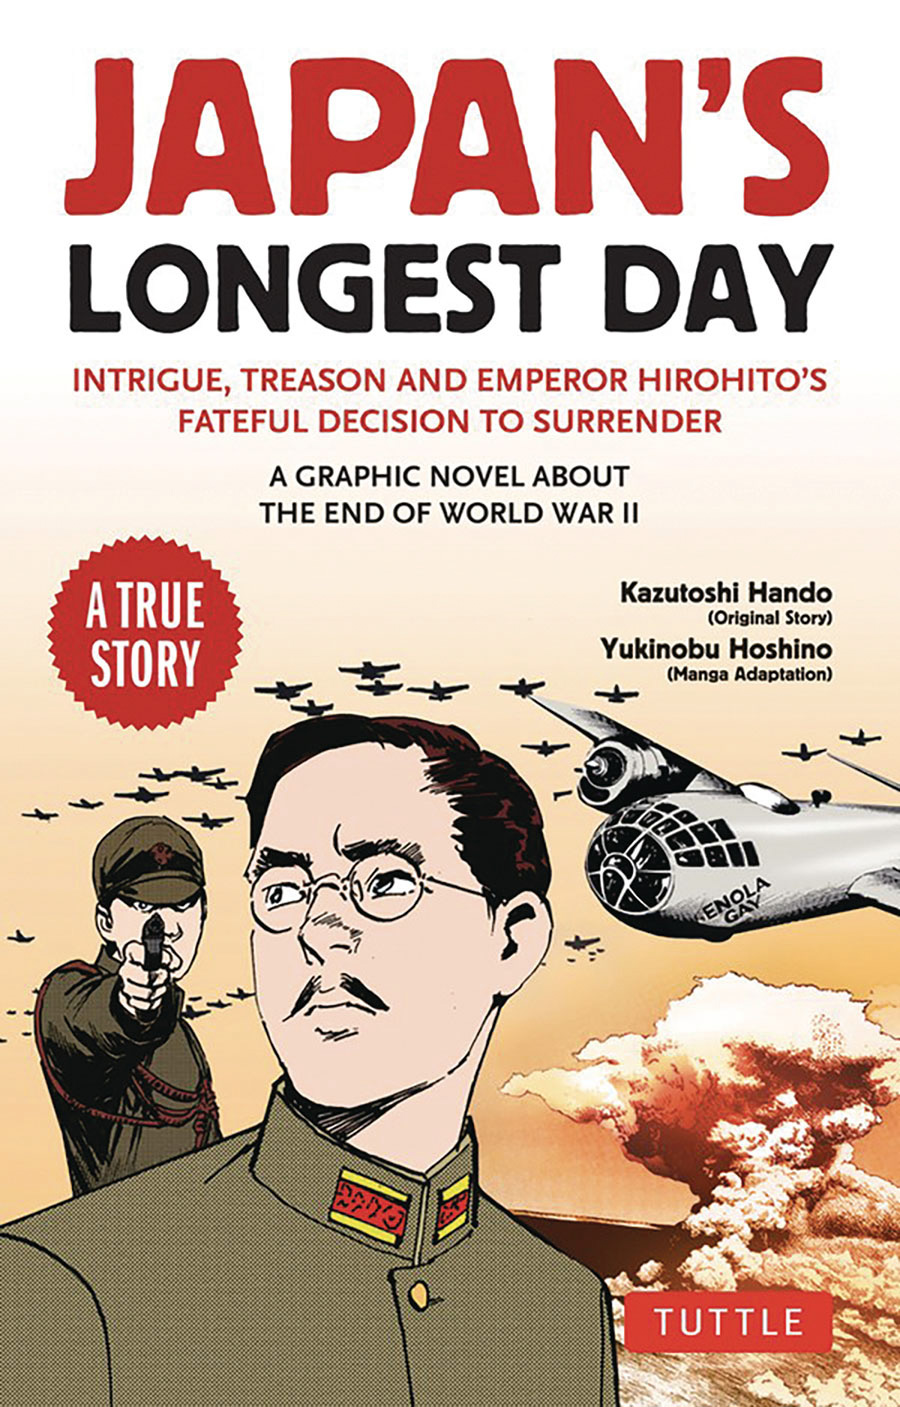 Japans Longest Day Intrigue Treason And Emperor Hirohitos Fateful Decision To Surrender A Graphic Novel About The End Of World War II GN